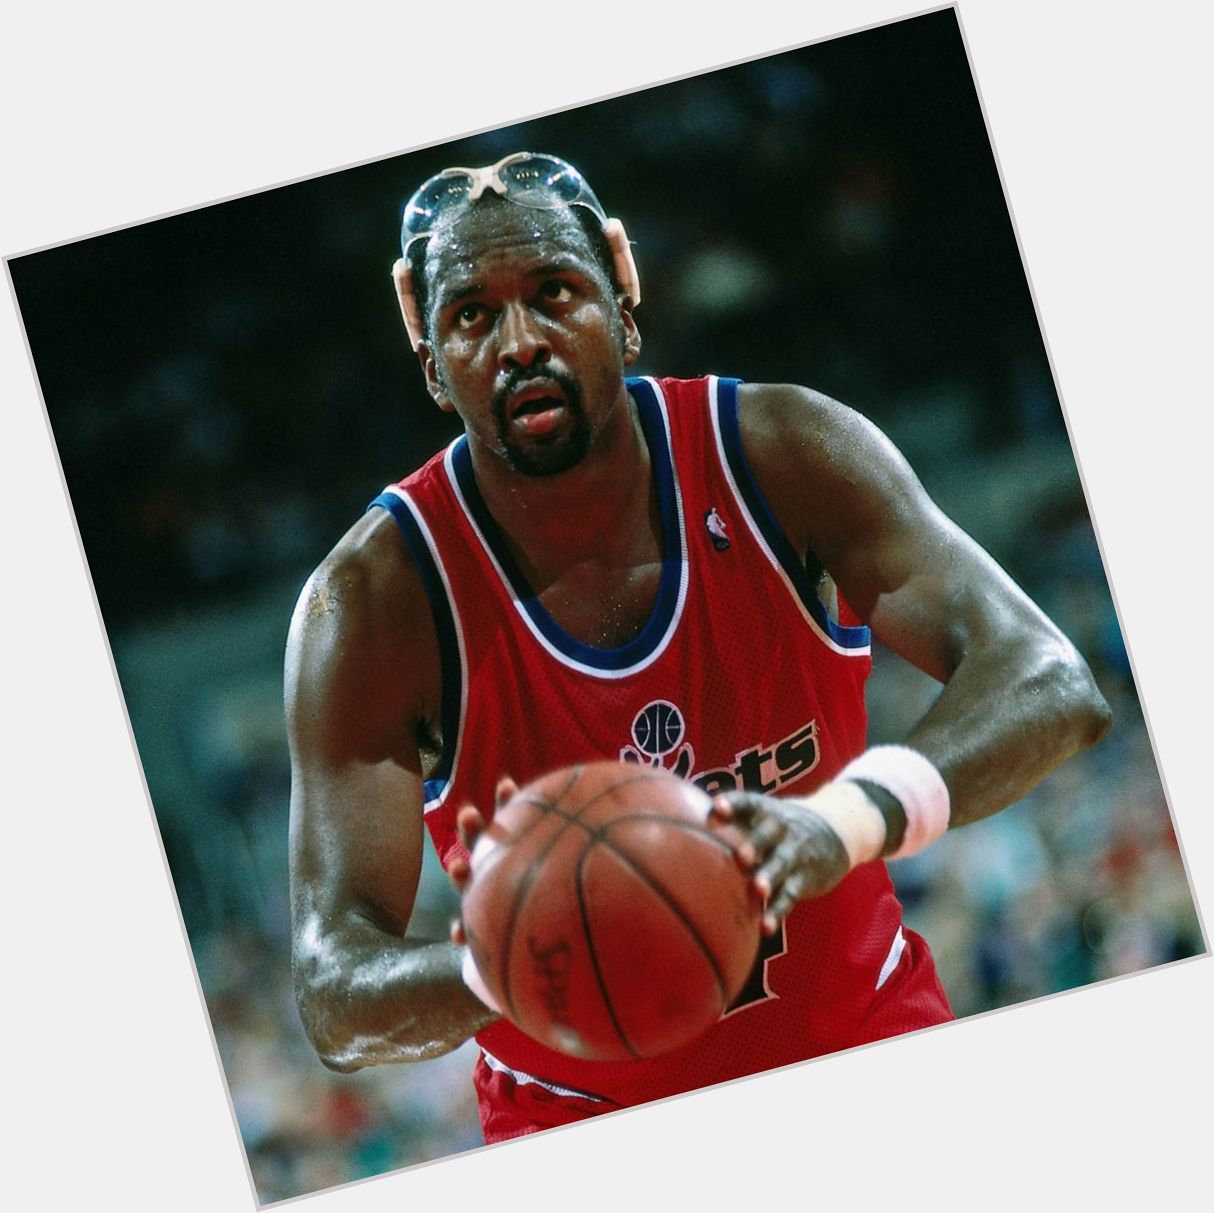 Happy Birthday to the late NBA legend Moses Malone! 